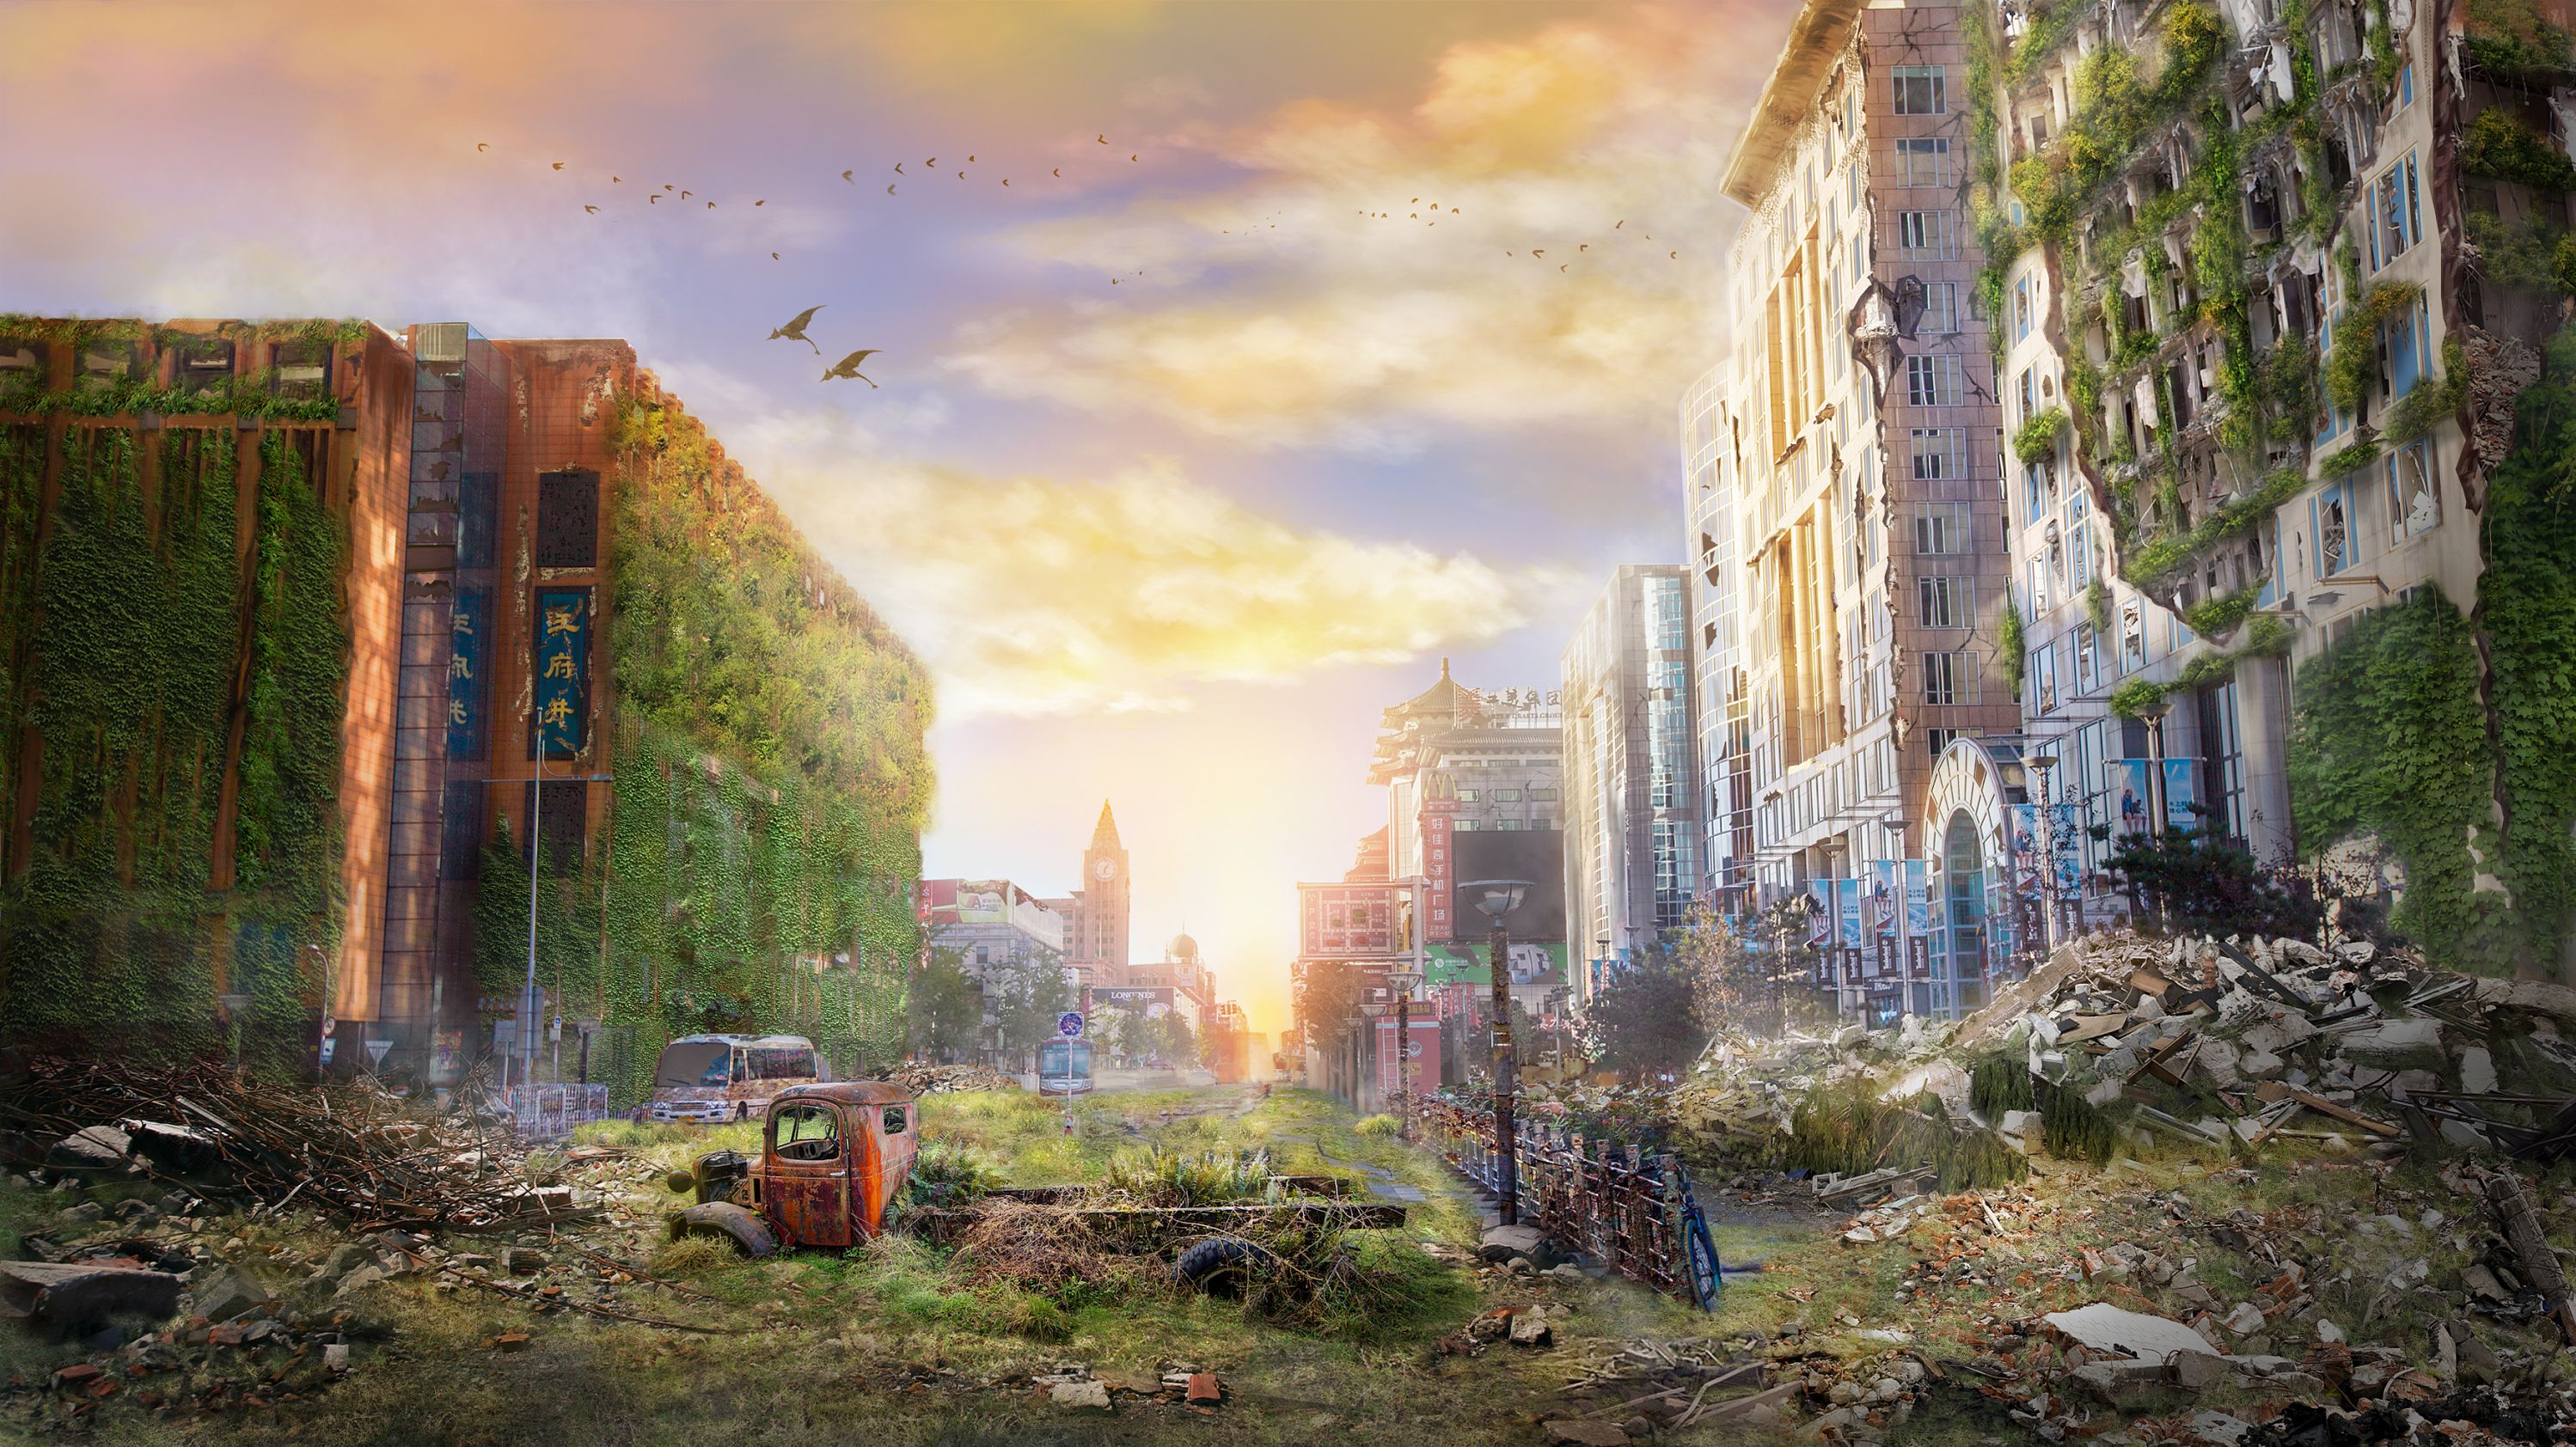 The Last Of Us Hd Game Wallpapers - Last Of Us Concept Art - 1440x900 ...